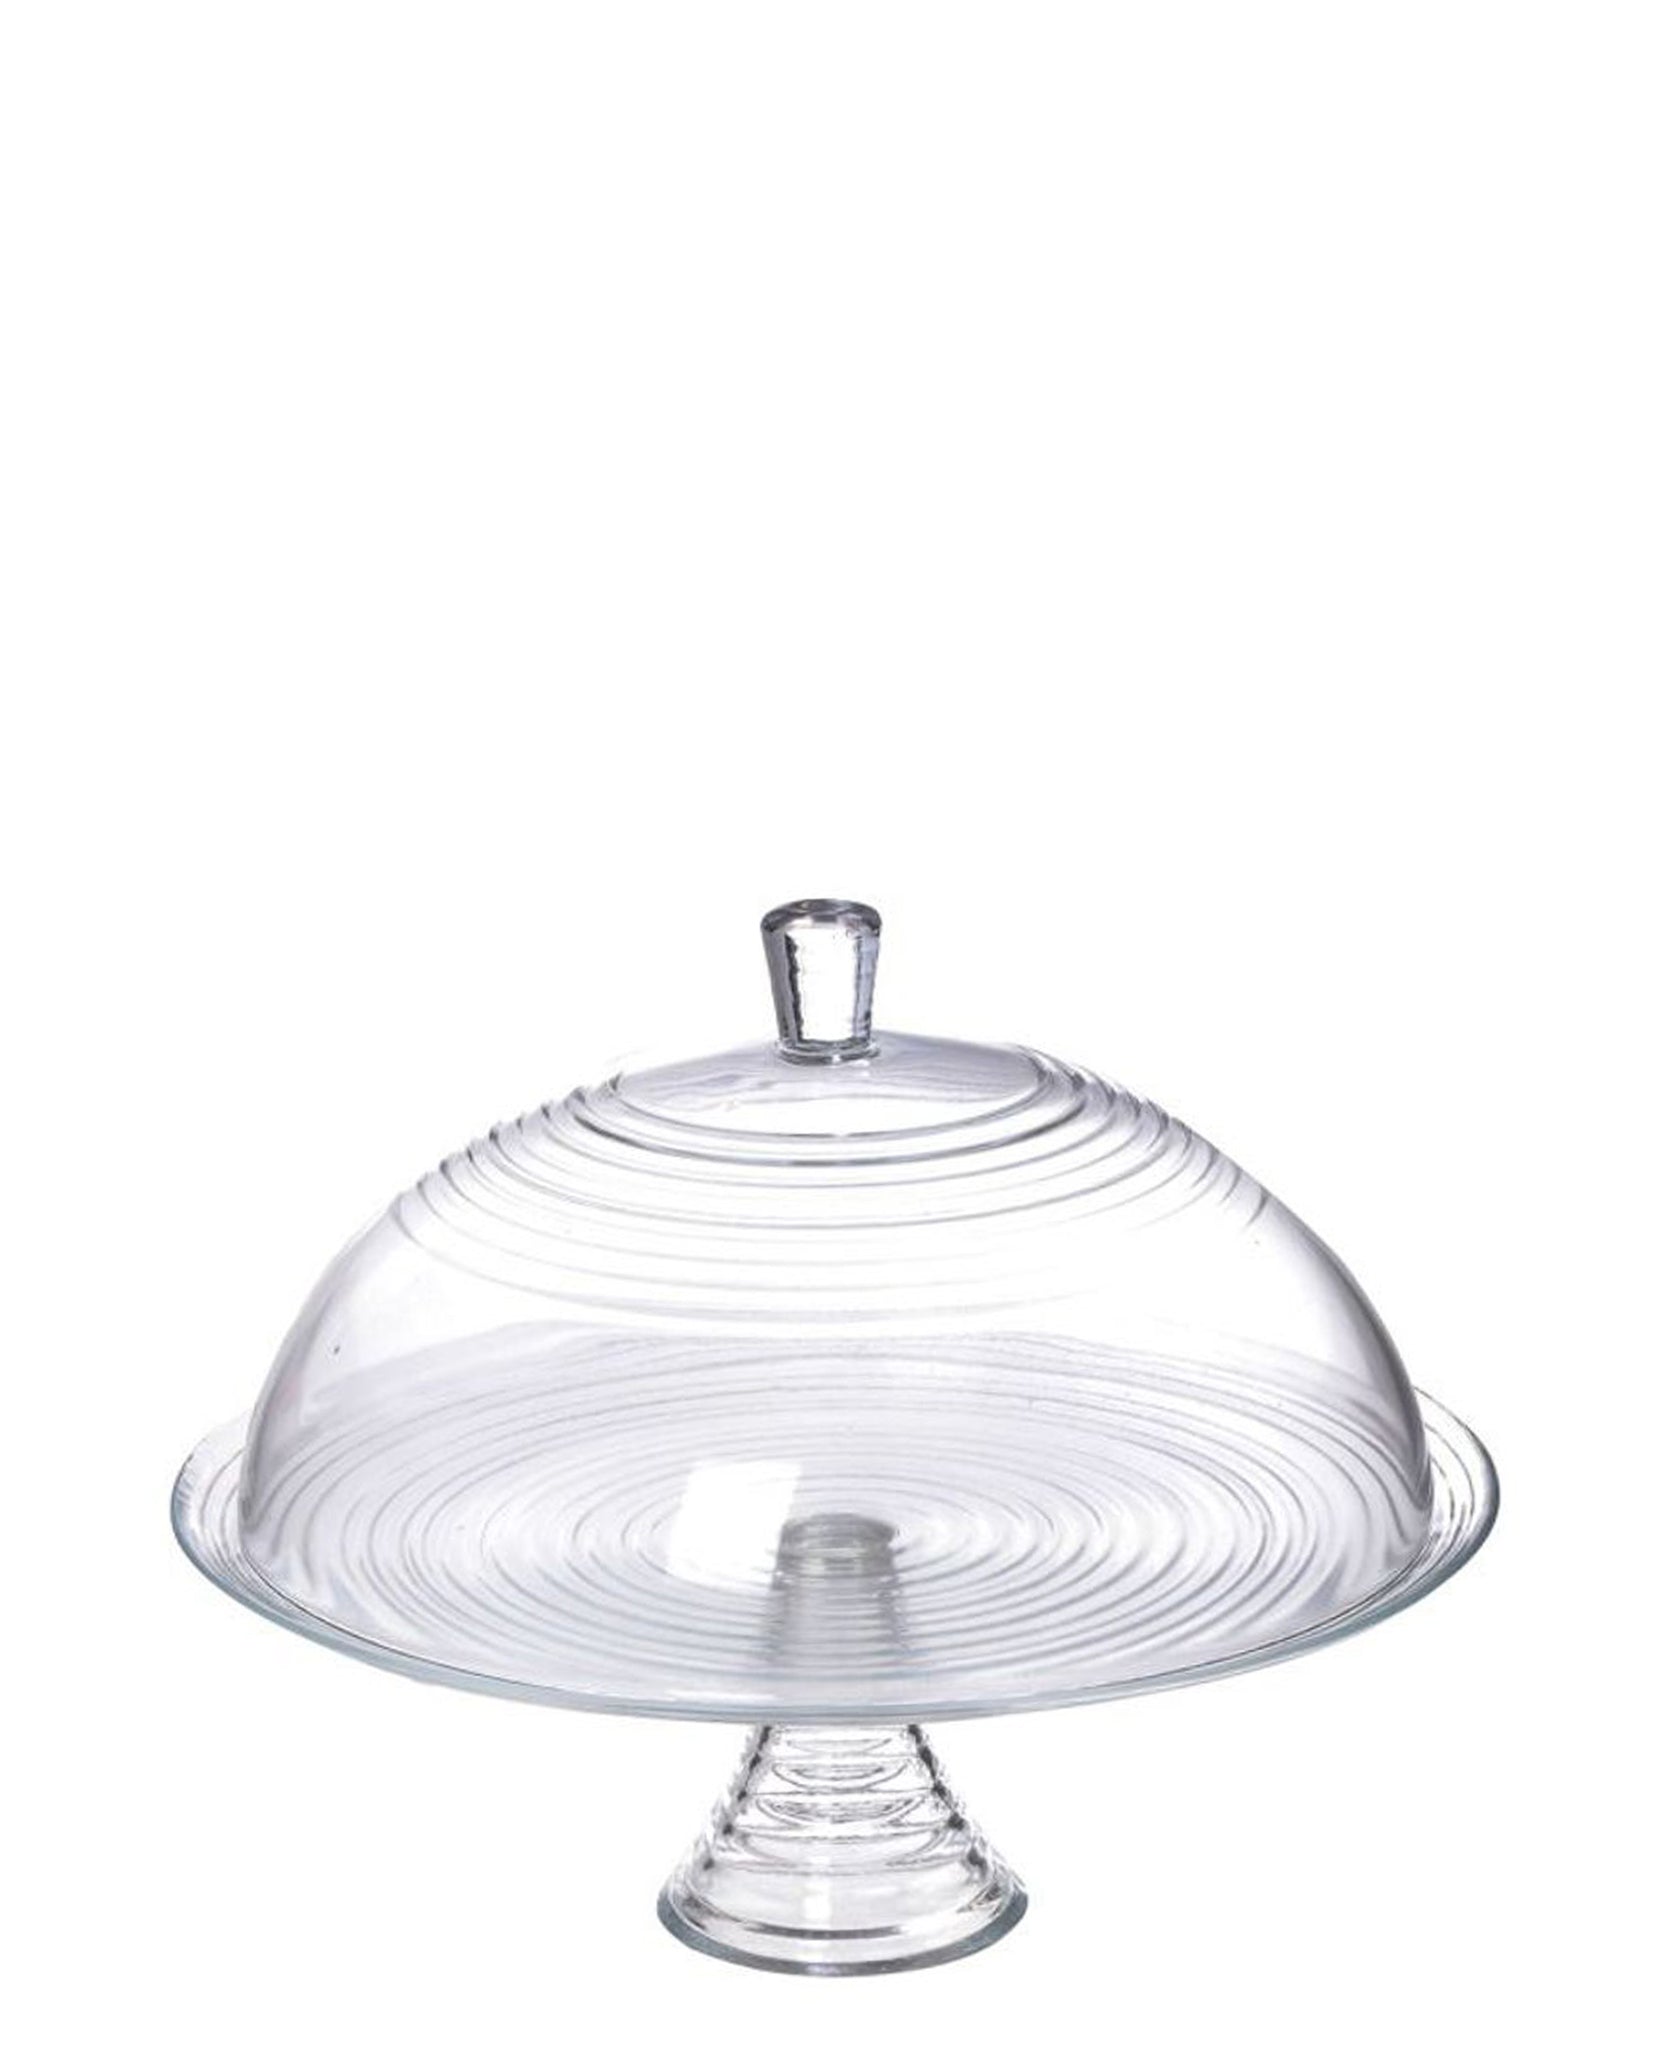 LAV Cake Dome With lid - Clear